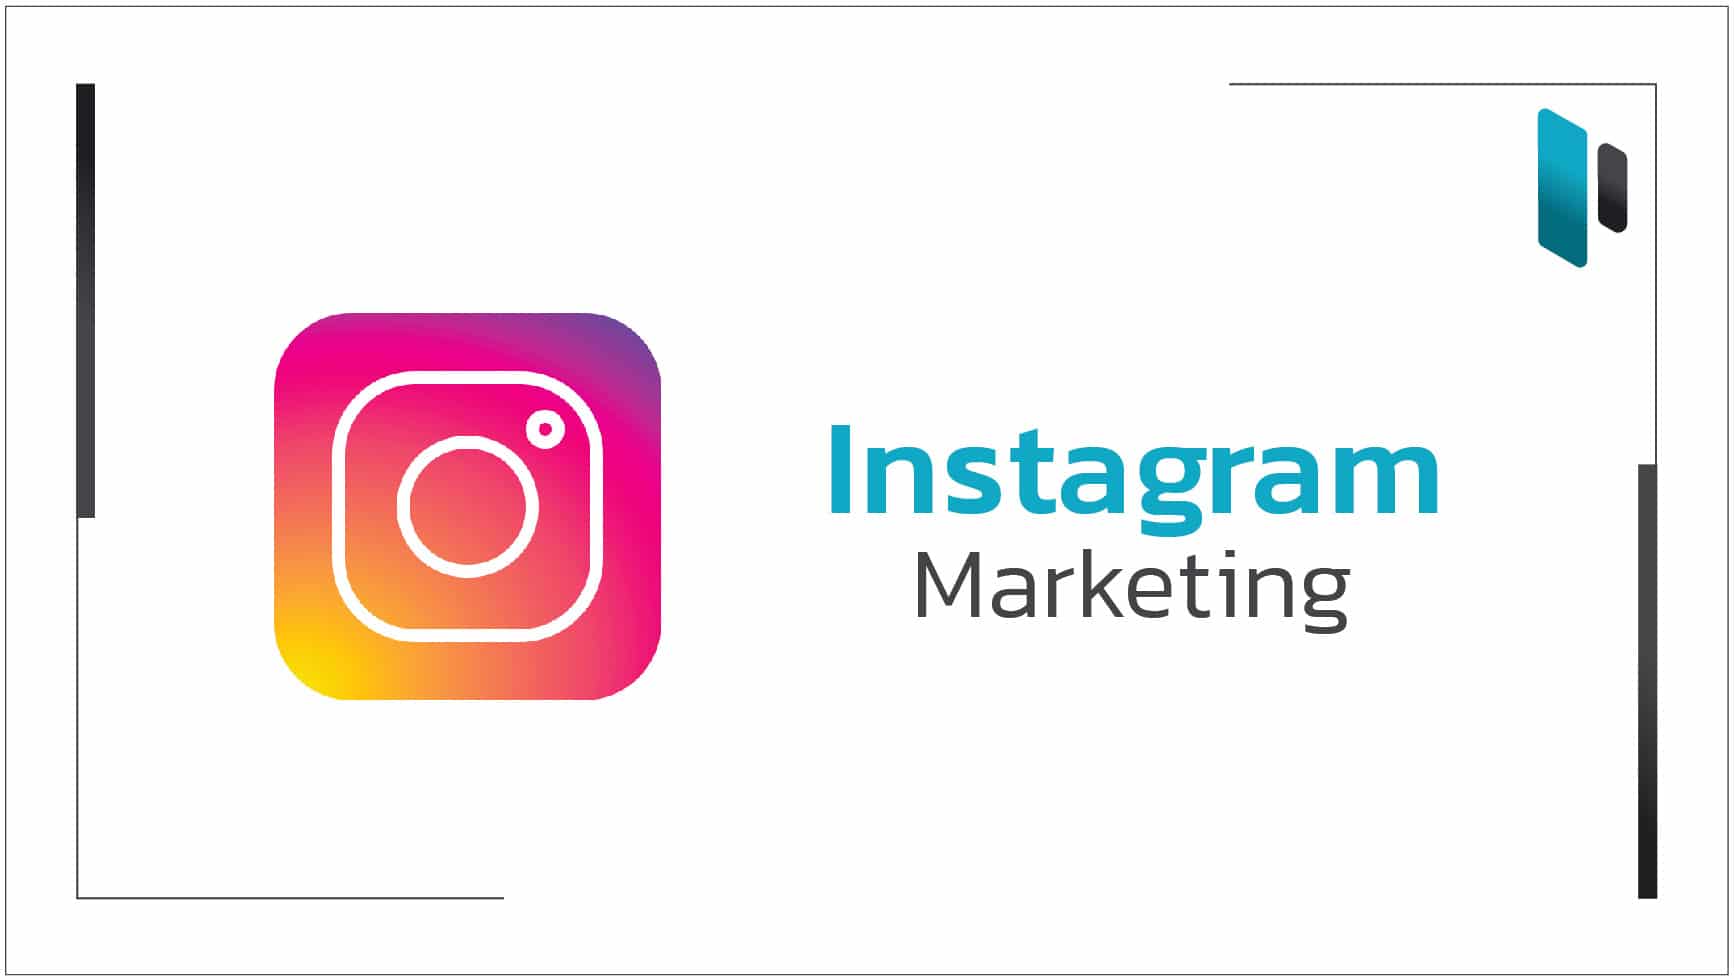 instagram advertising companies, instagram marketing agency india, instagram promotion cost india, instagram promotion services, instagram marketing company india, best instagram promotion services, instagram influencer marketing agency india, instagram marketing india, instagram paid promotion cost india